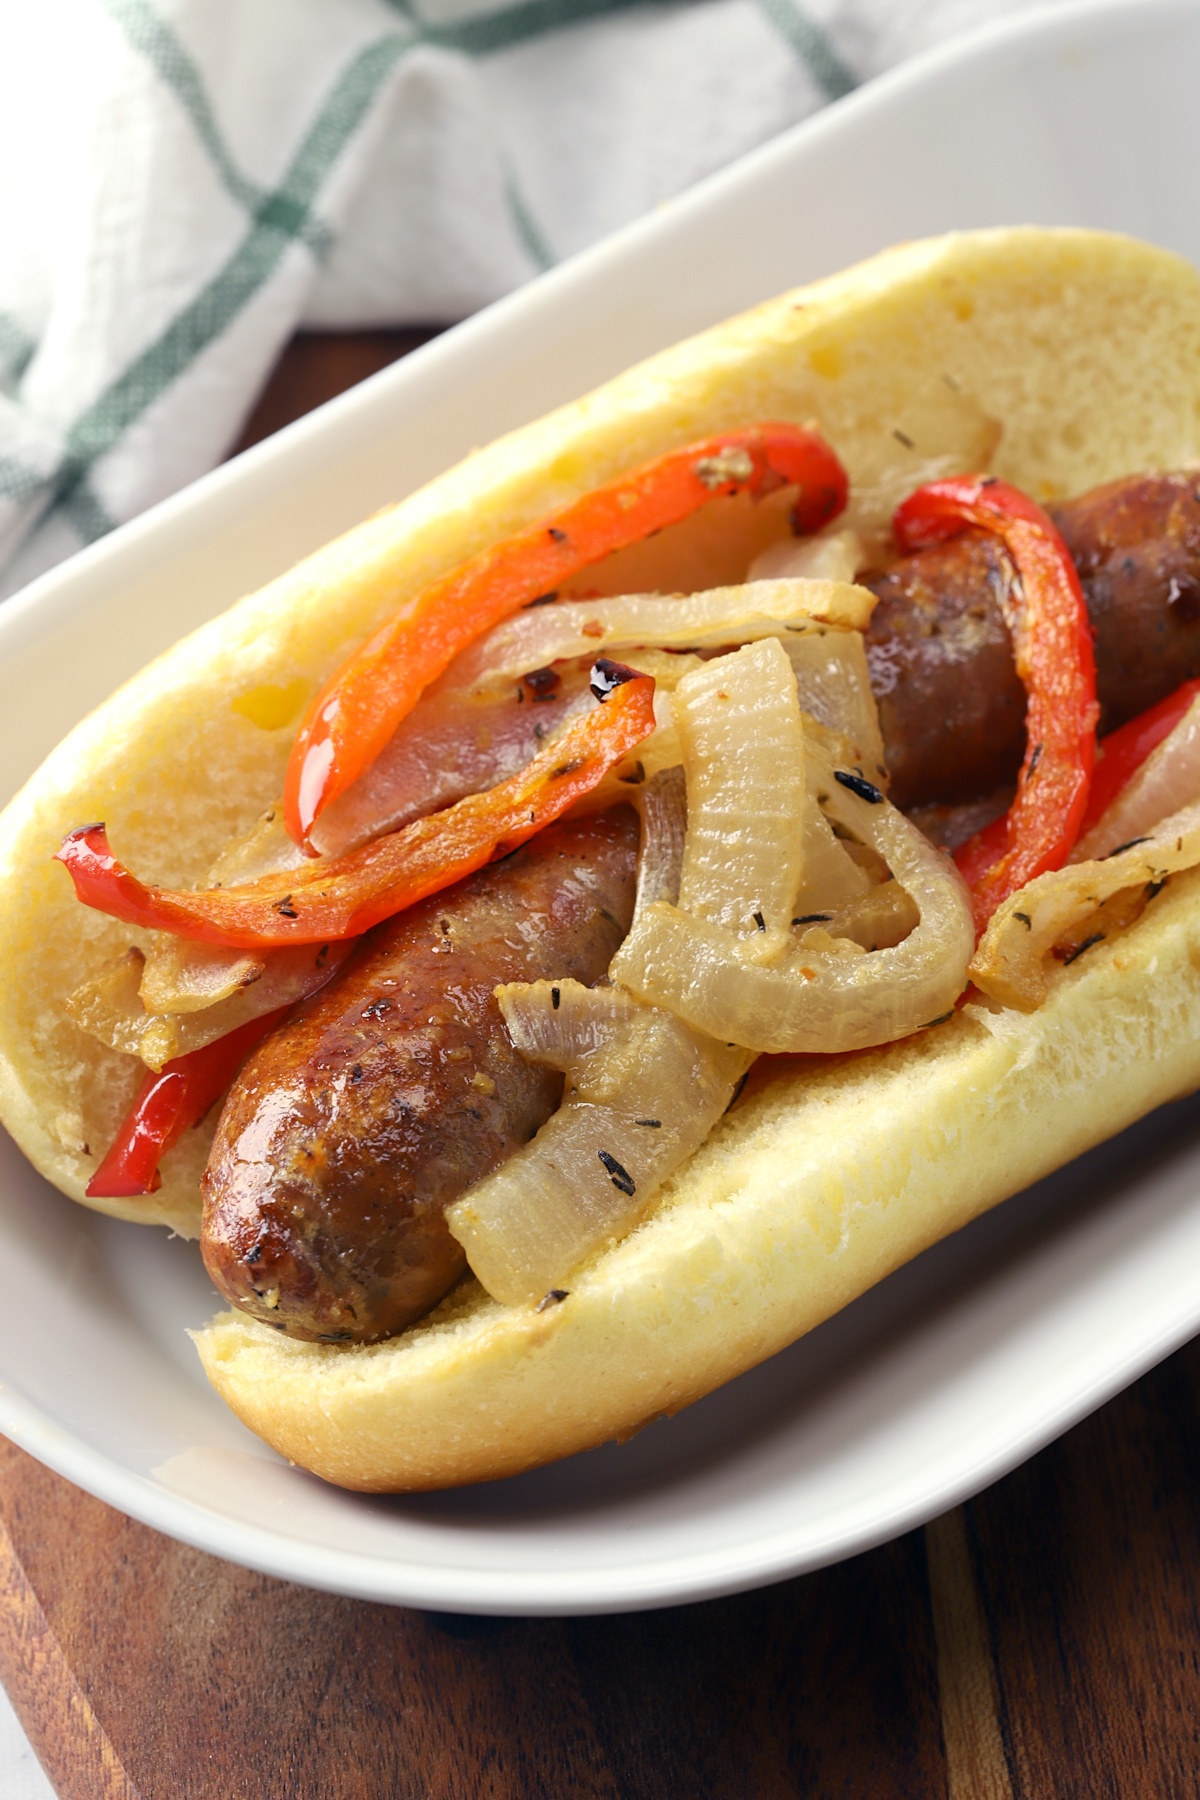 Bratwurst on a hot dog bun, topped with onions and peppers.